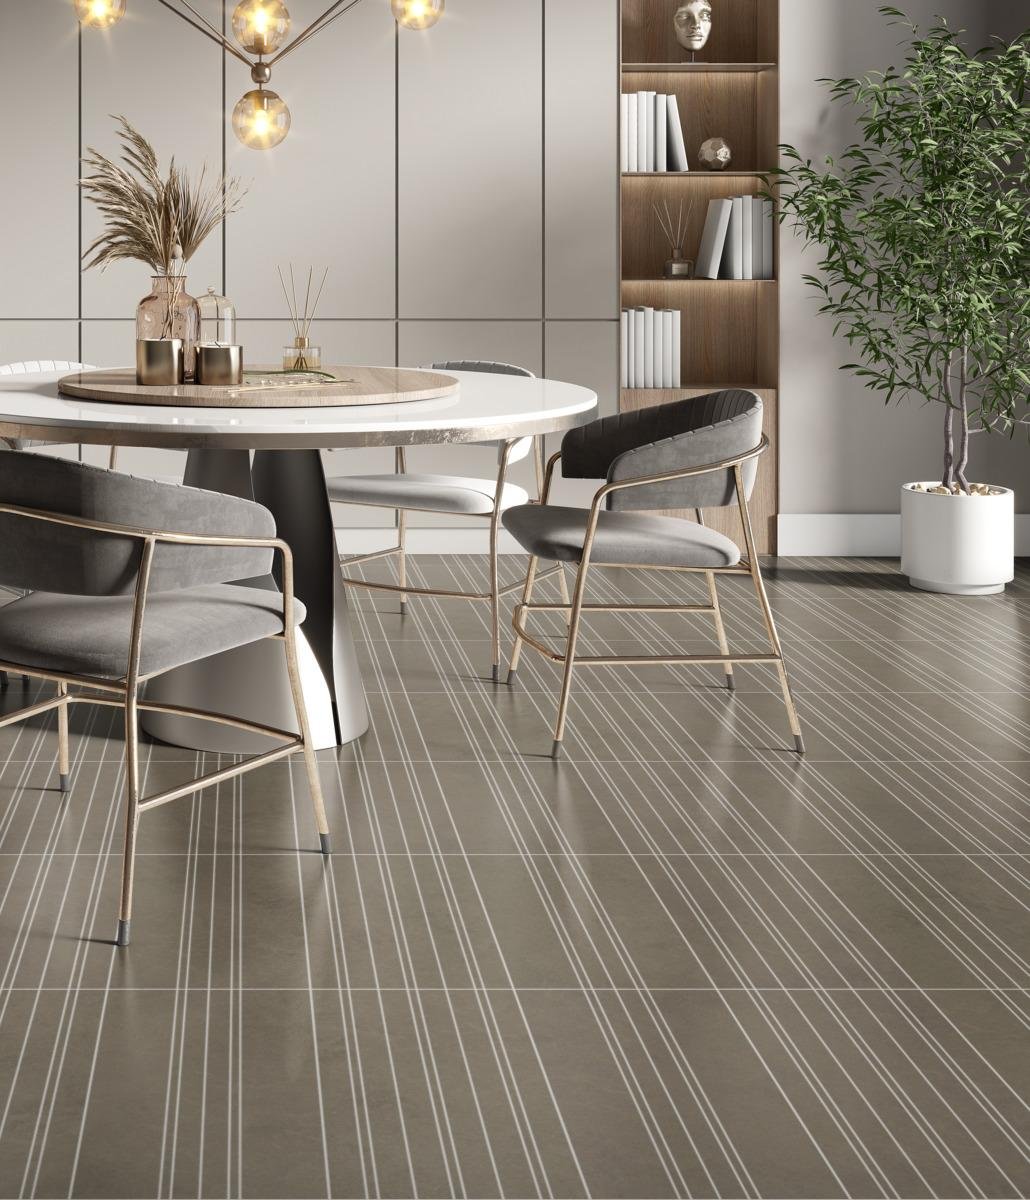 Huck Pinstripe, Pattern A, Grande Scale, Taupe, Warm Gray Grout